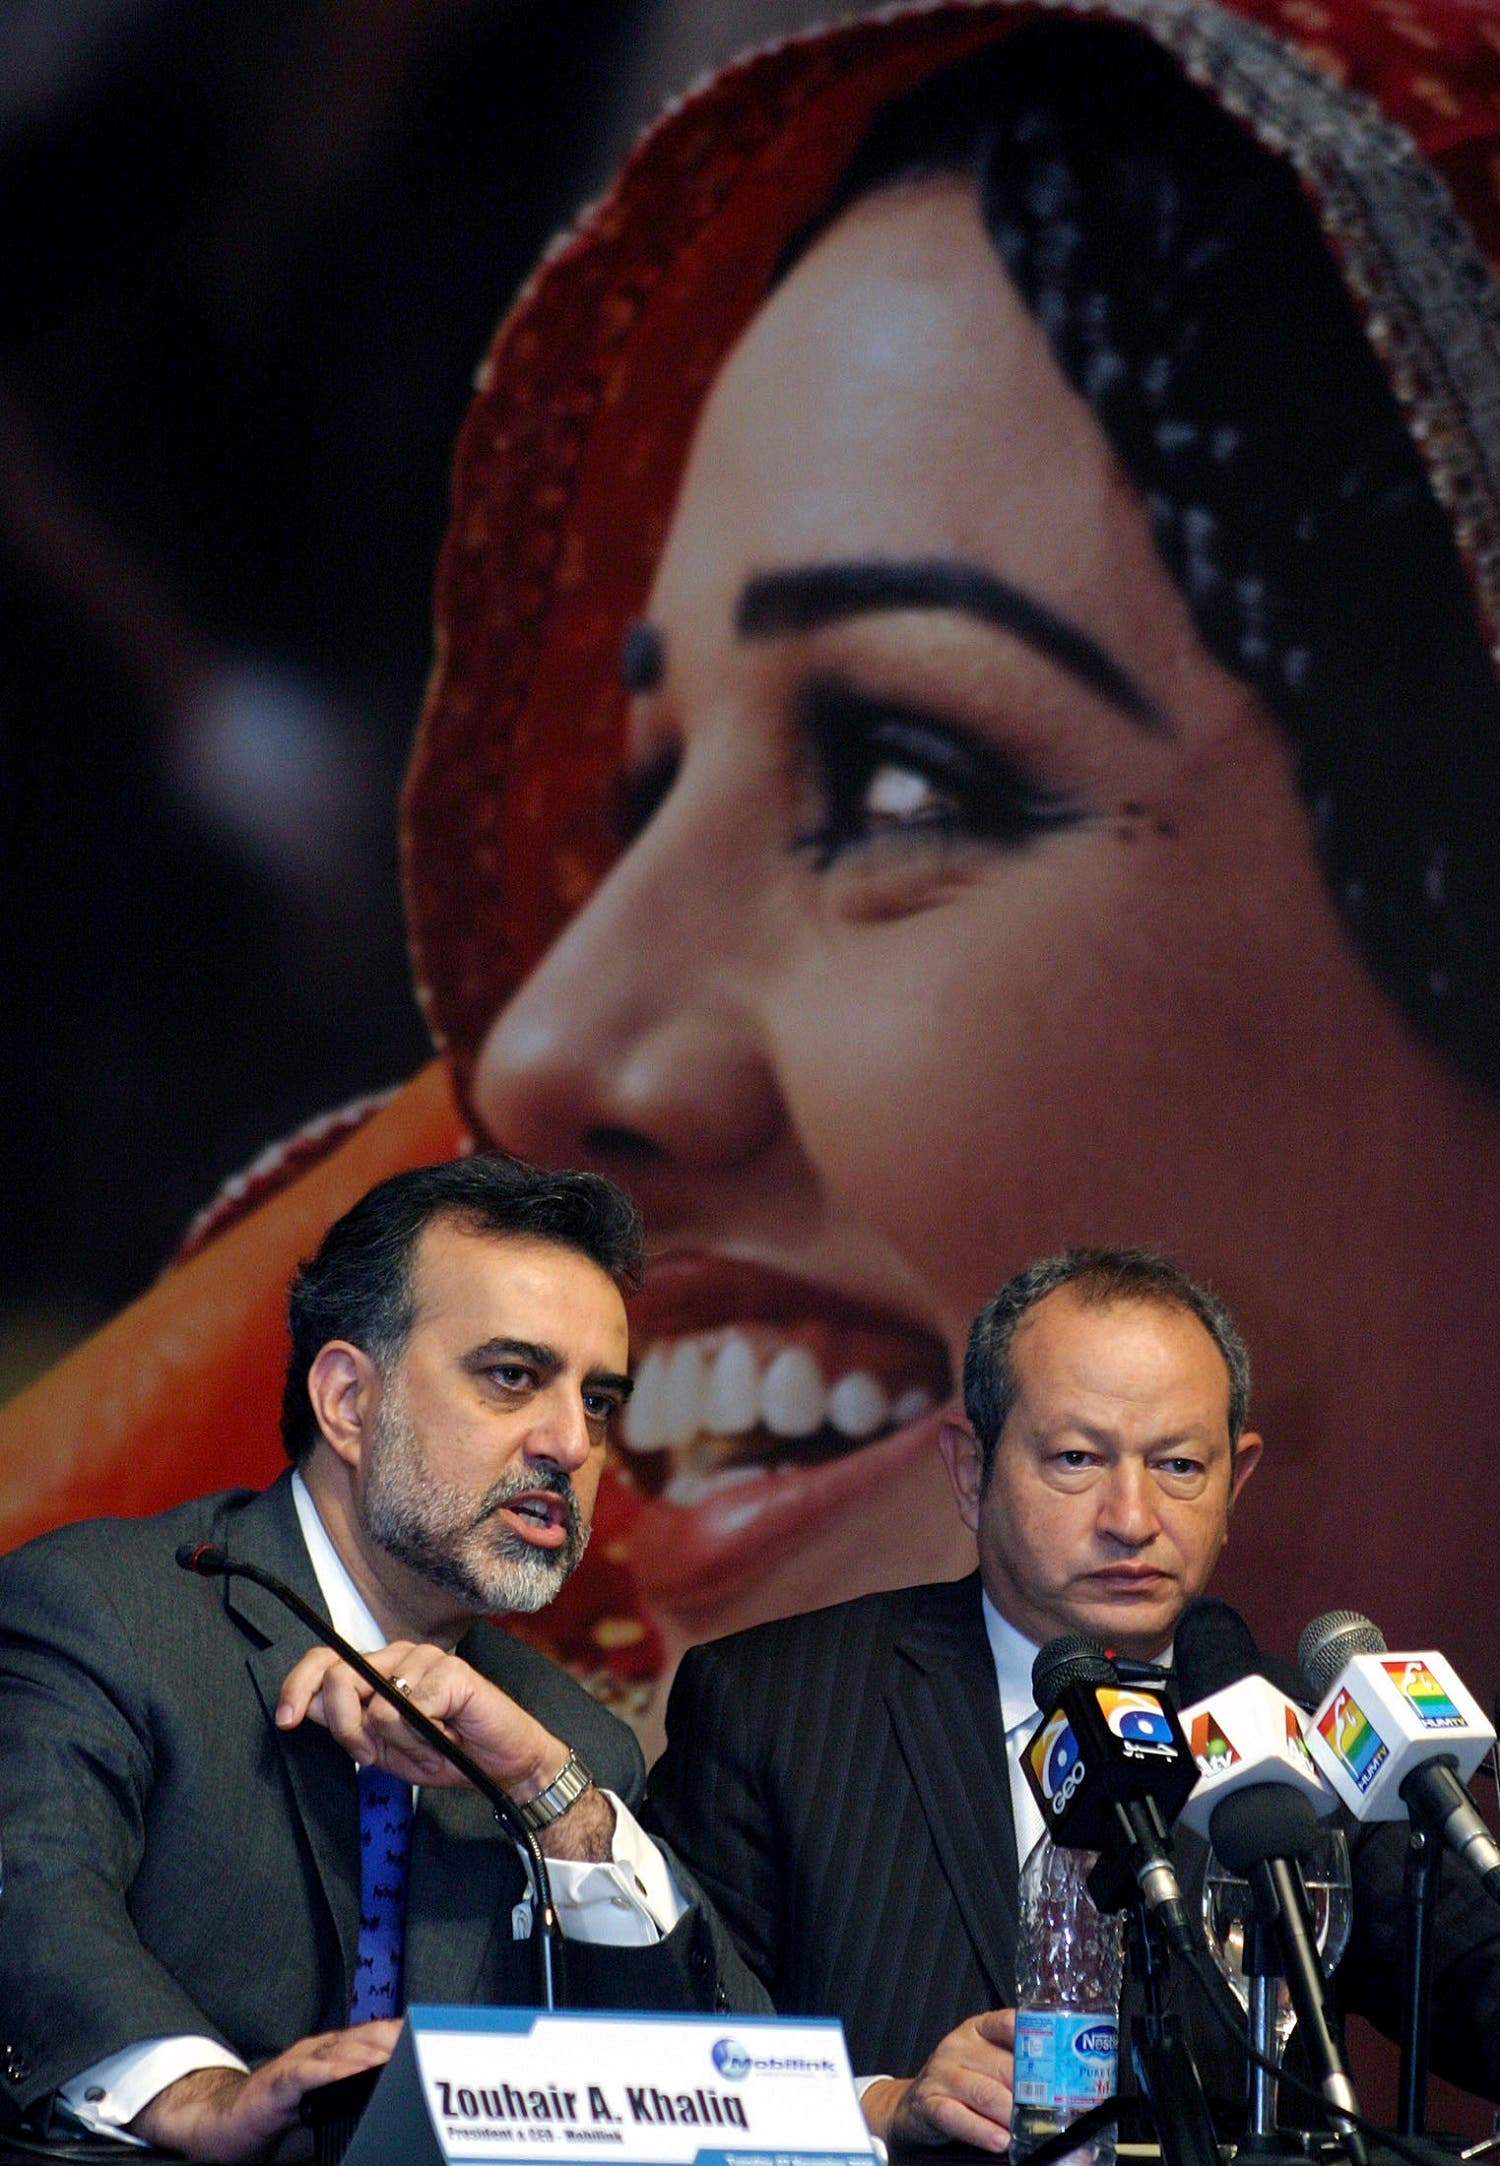 Zouhair A. Khaliq (L) chief executive and President of Mobilink speaks with Naguib Sawiris during a news conference in Islamabad November 7, 2006. (Reuters)